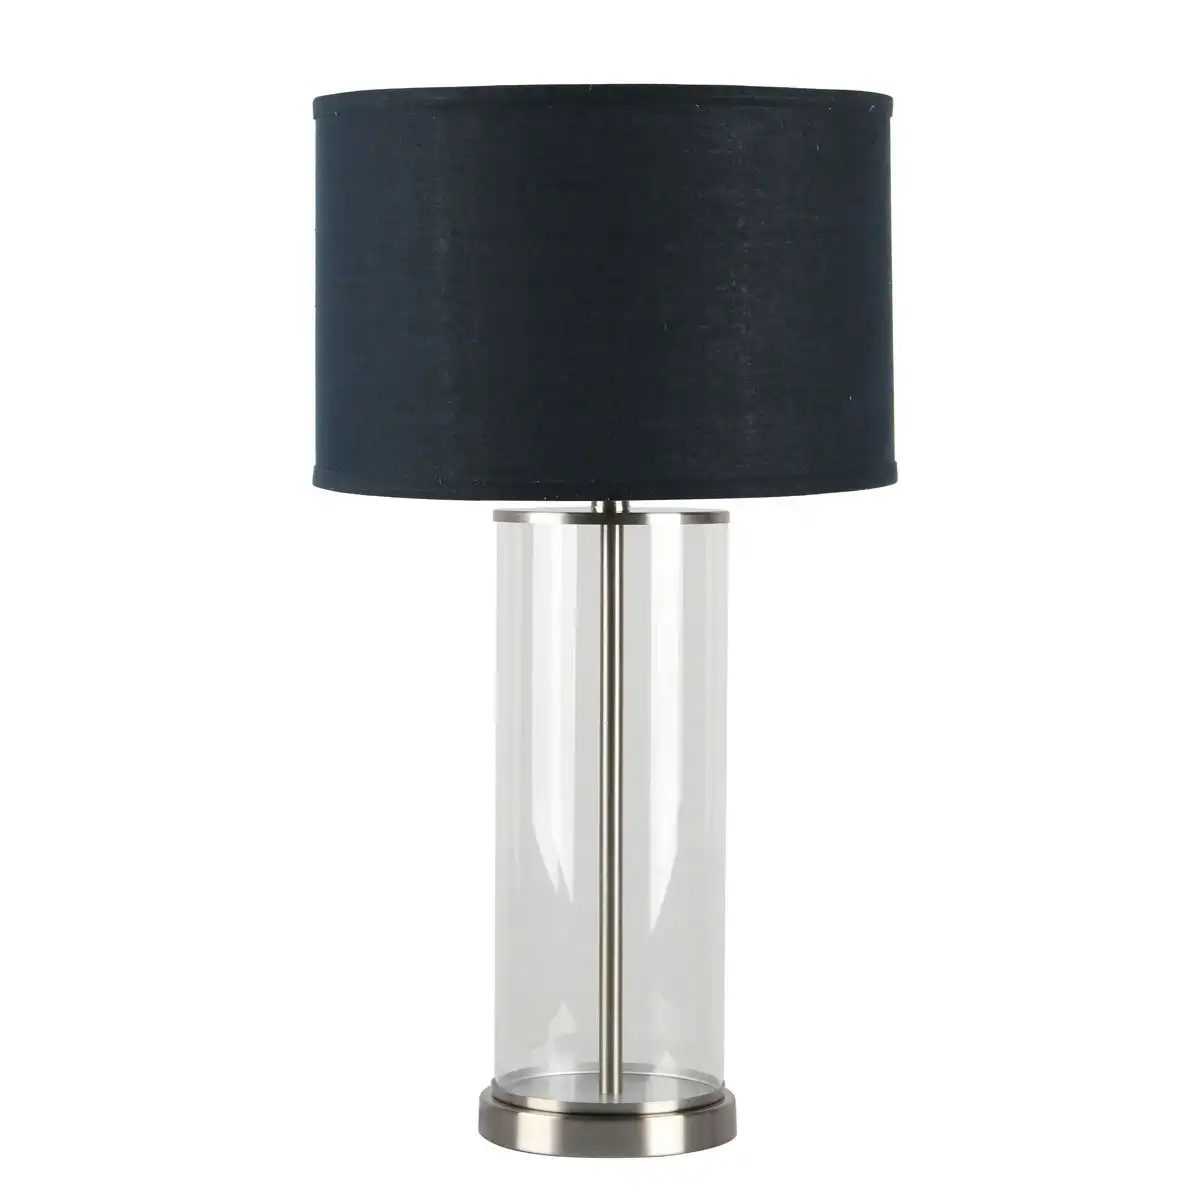 Cafe Lighting Left Bank Table Lamp - Nickel with Navy Shade